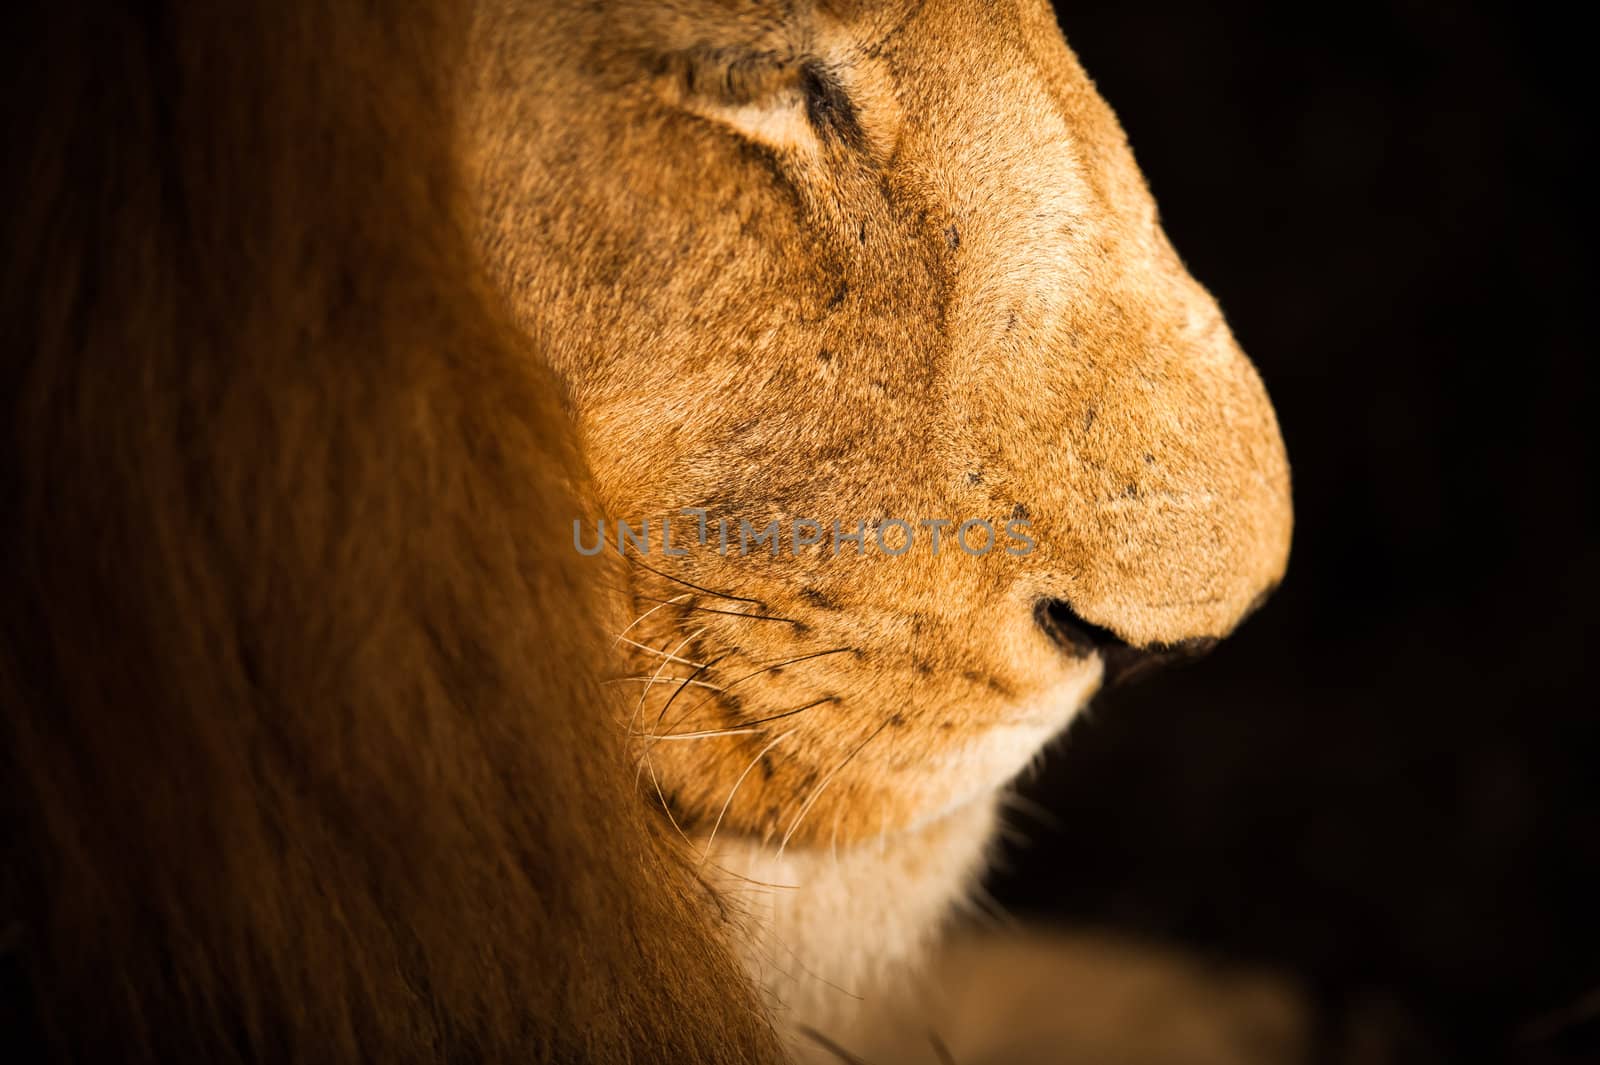 Male lion face close up at night